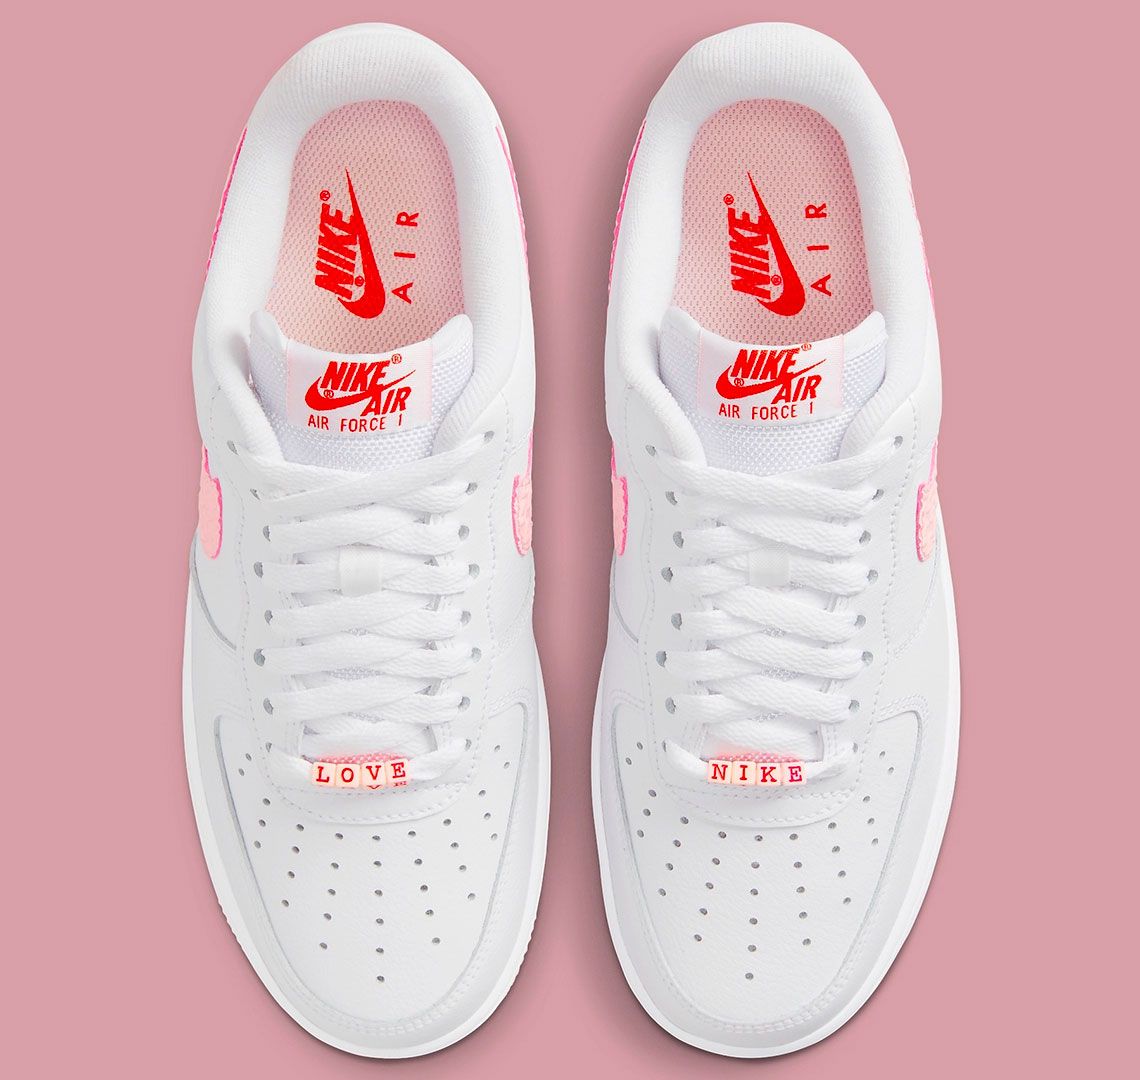 Nike Air Force 1 Valentine's Day product image of white and pink sneakers.